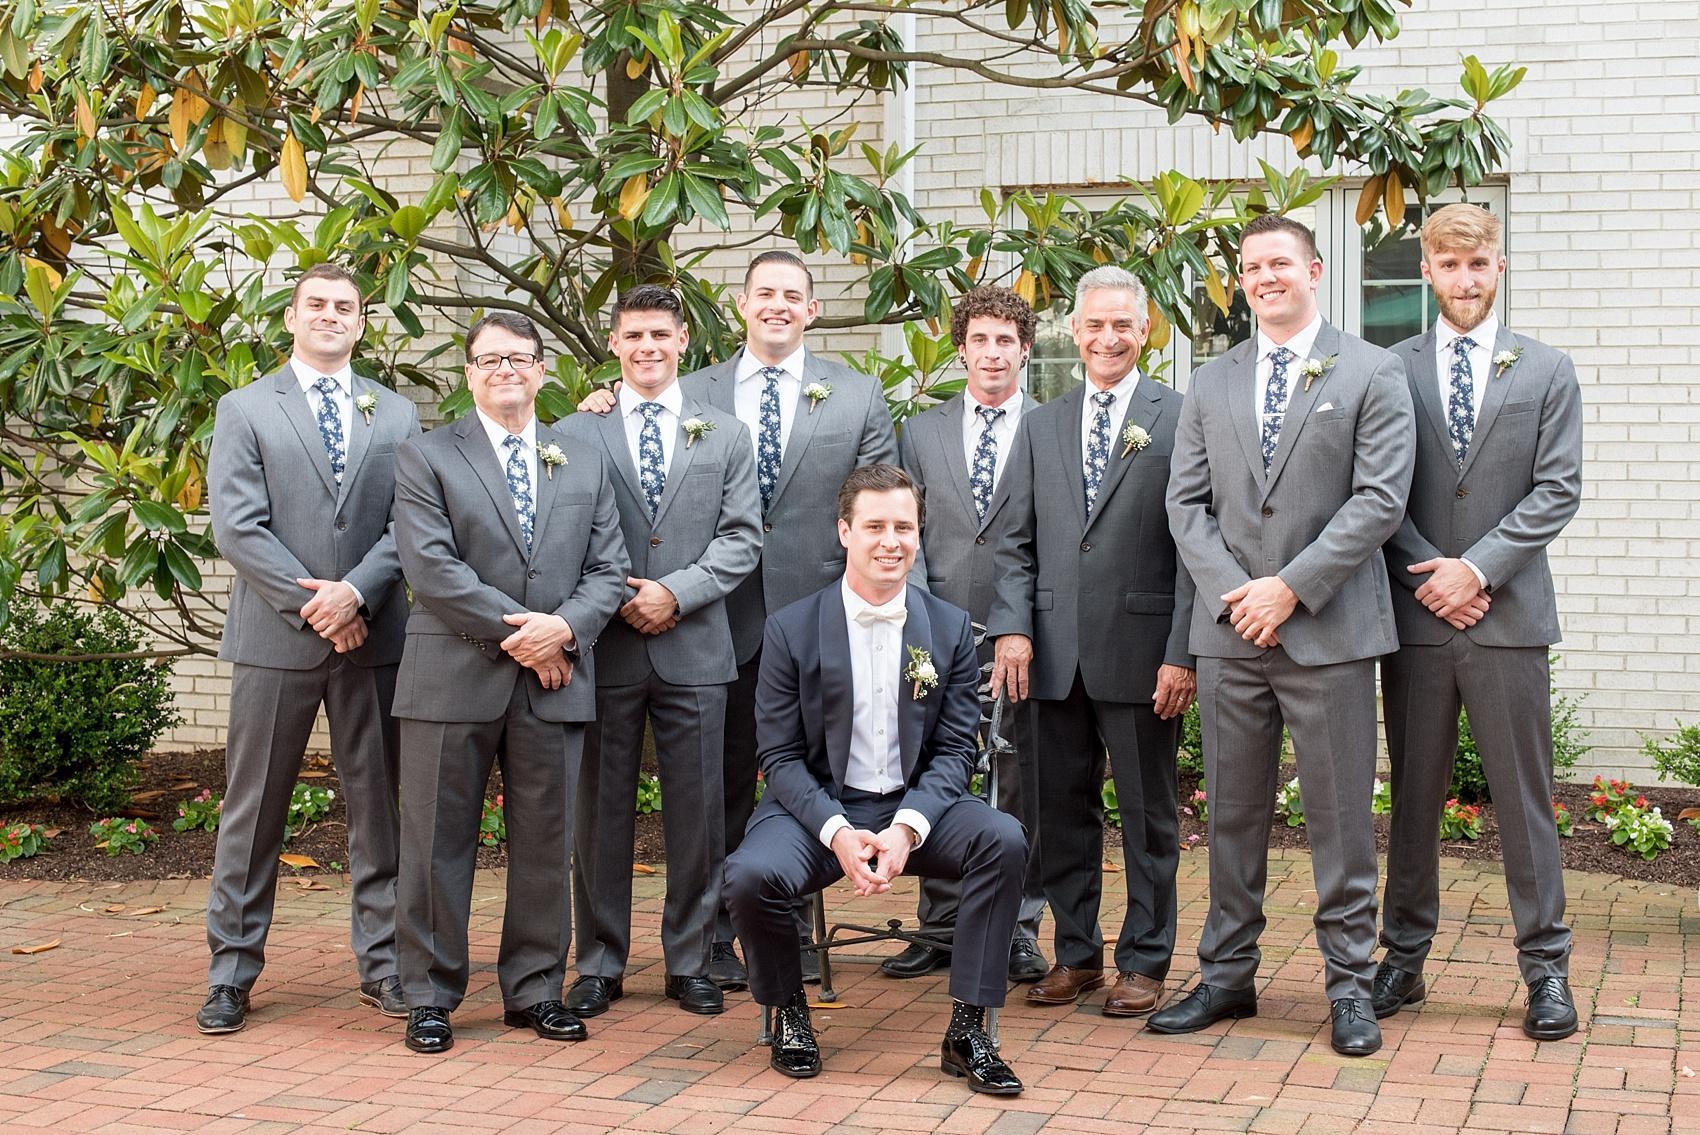 Mikkel Paige Photography captures groomsmen at a wedding at The Madison Hotel NJ with grey suits and floral navy ties.